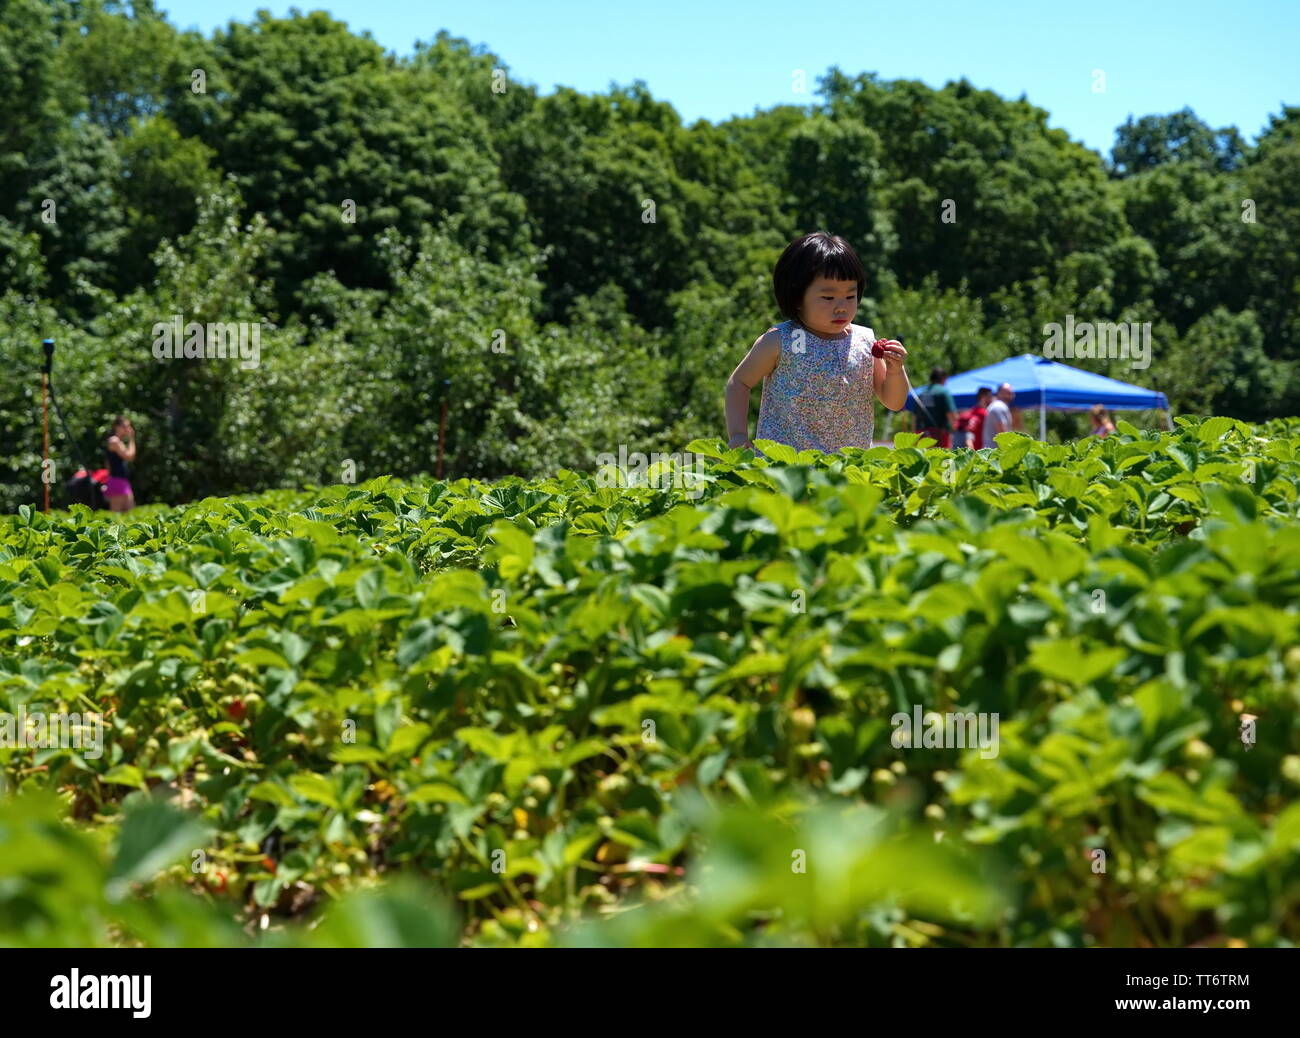 Middlefield, CT USA. Jun 2019. Young Asian American kid making sure this big juicy strawberry is ready for a quick sweet bite. Stock Photo